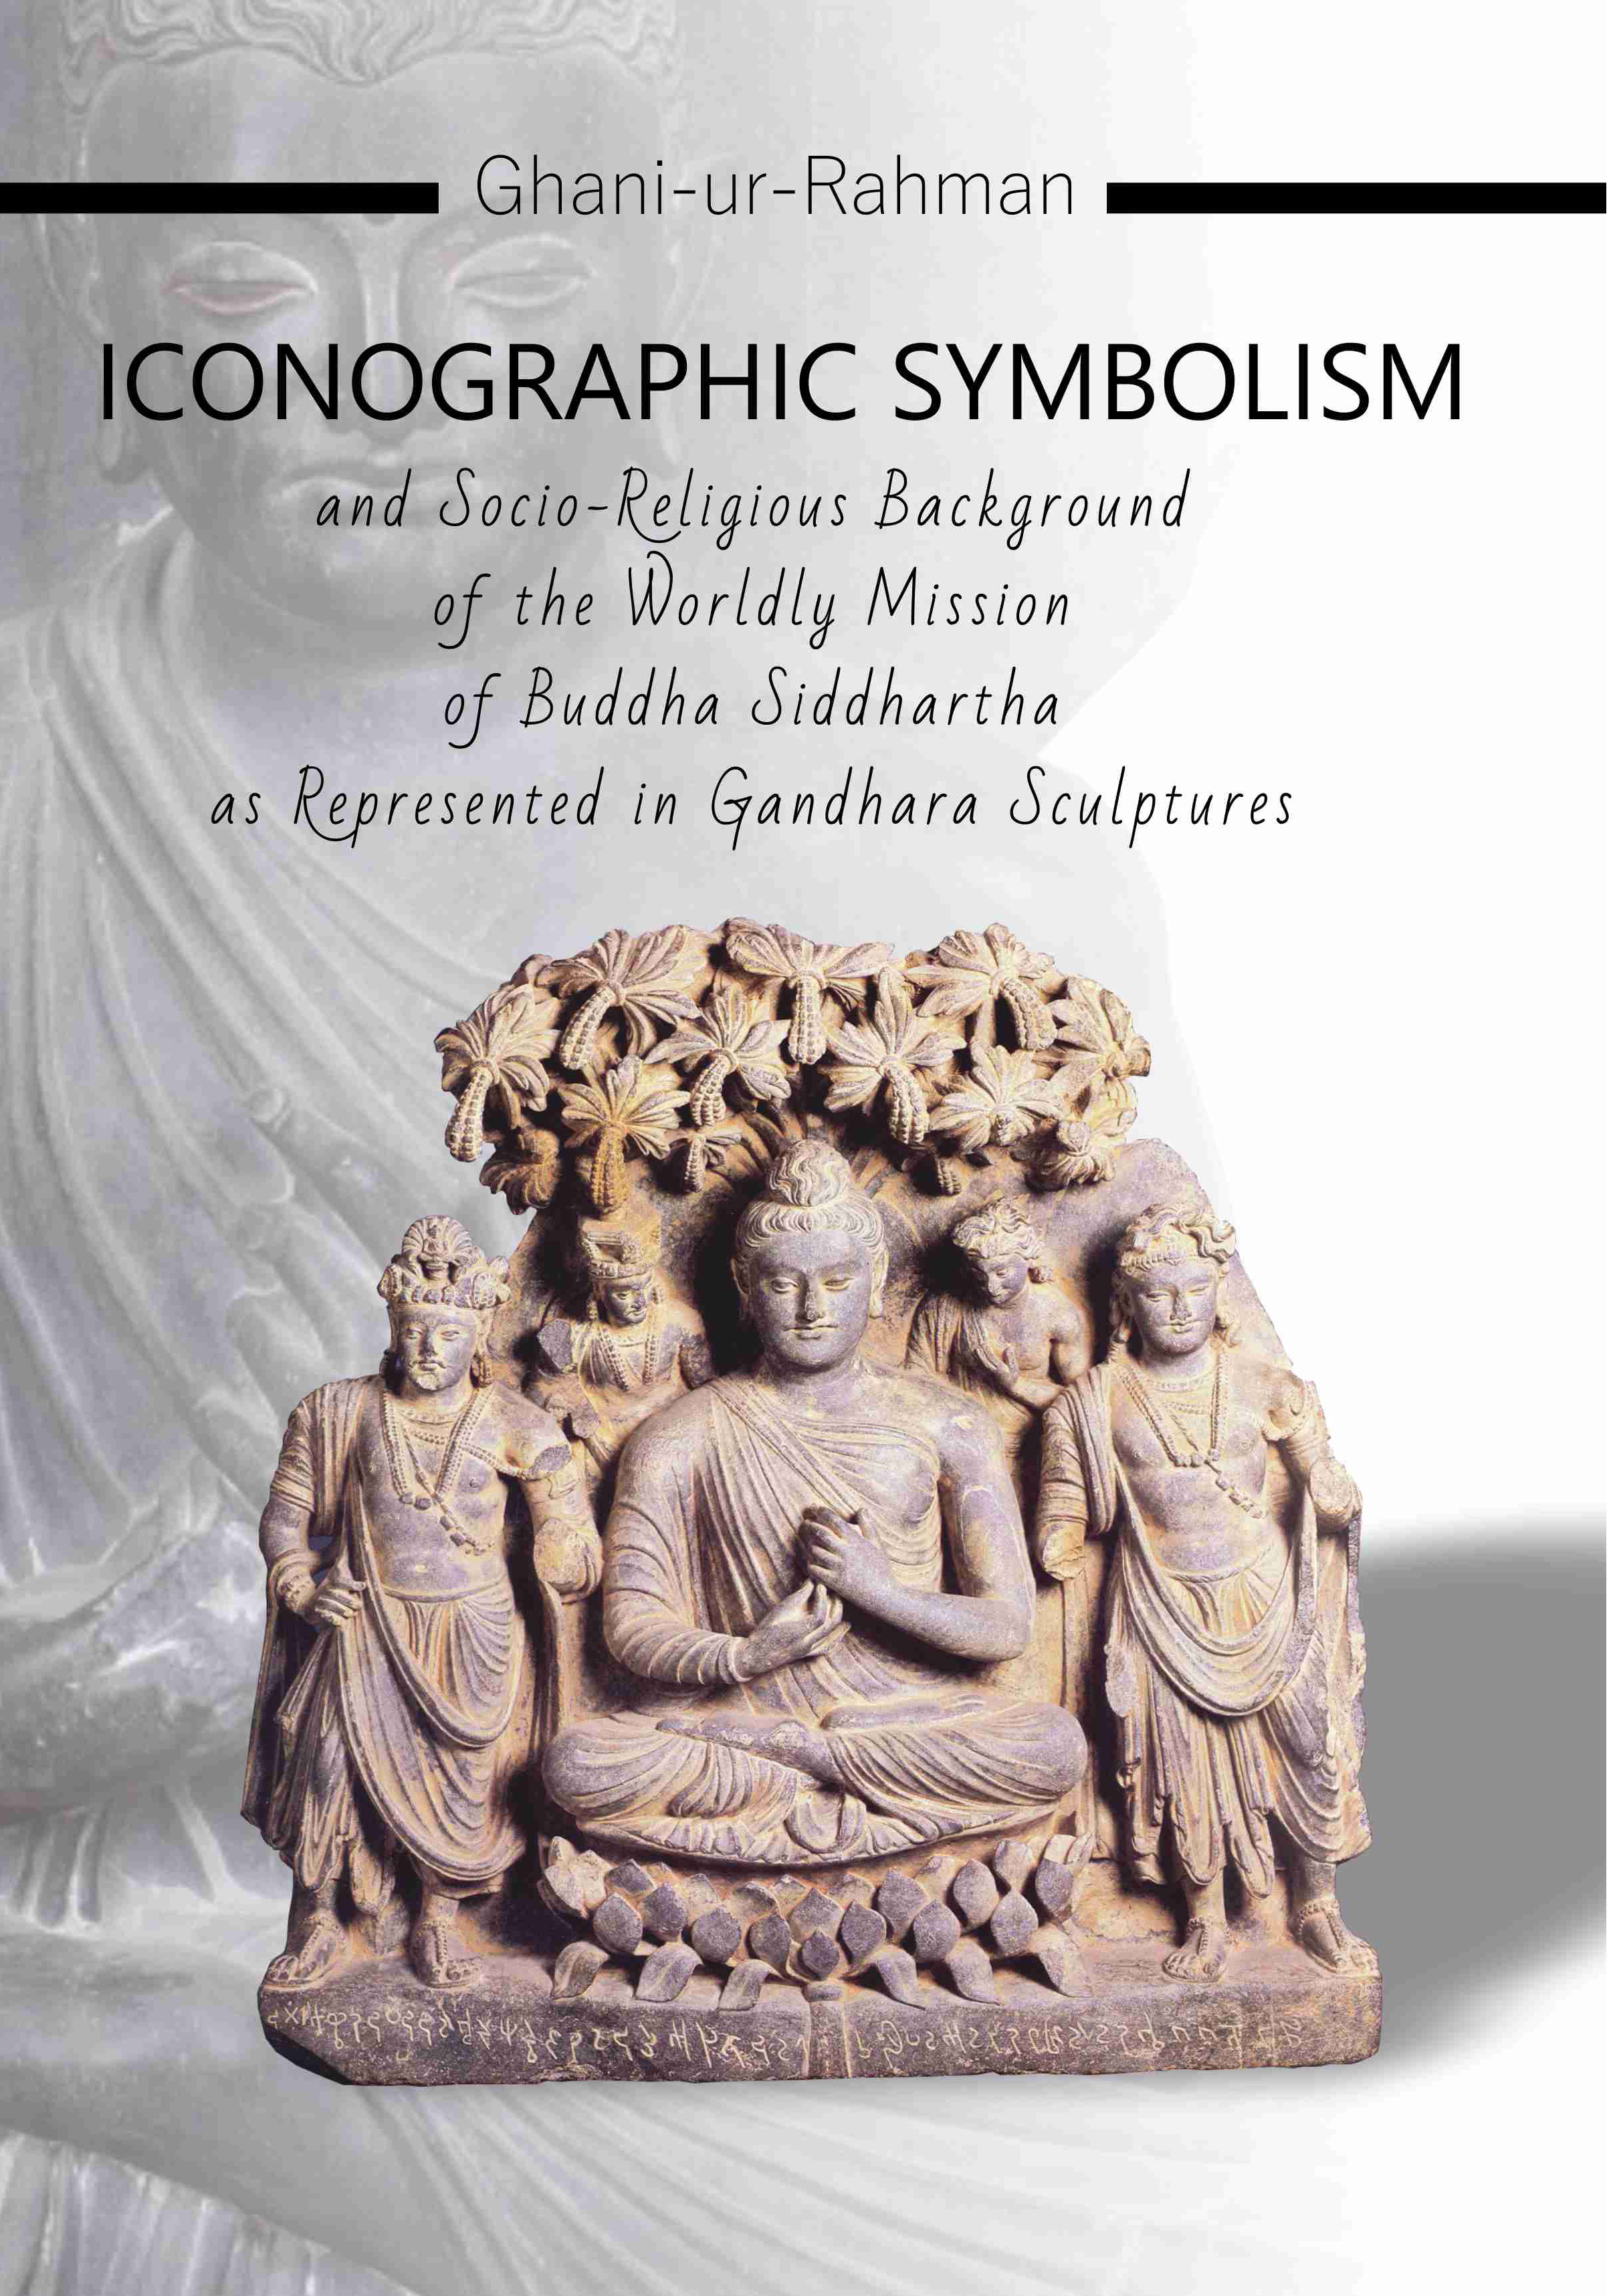 iconographic symbolism and socio-religious background of the worldly mission of buddha siddhartha as